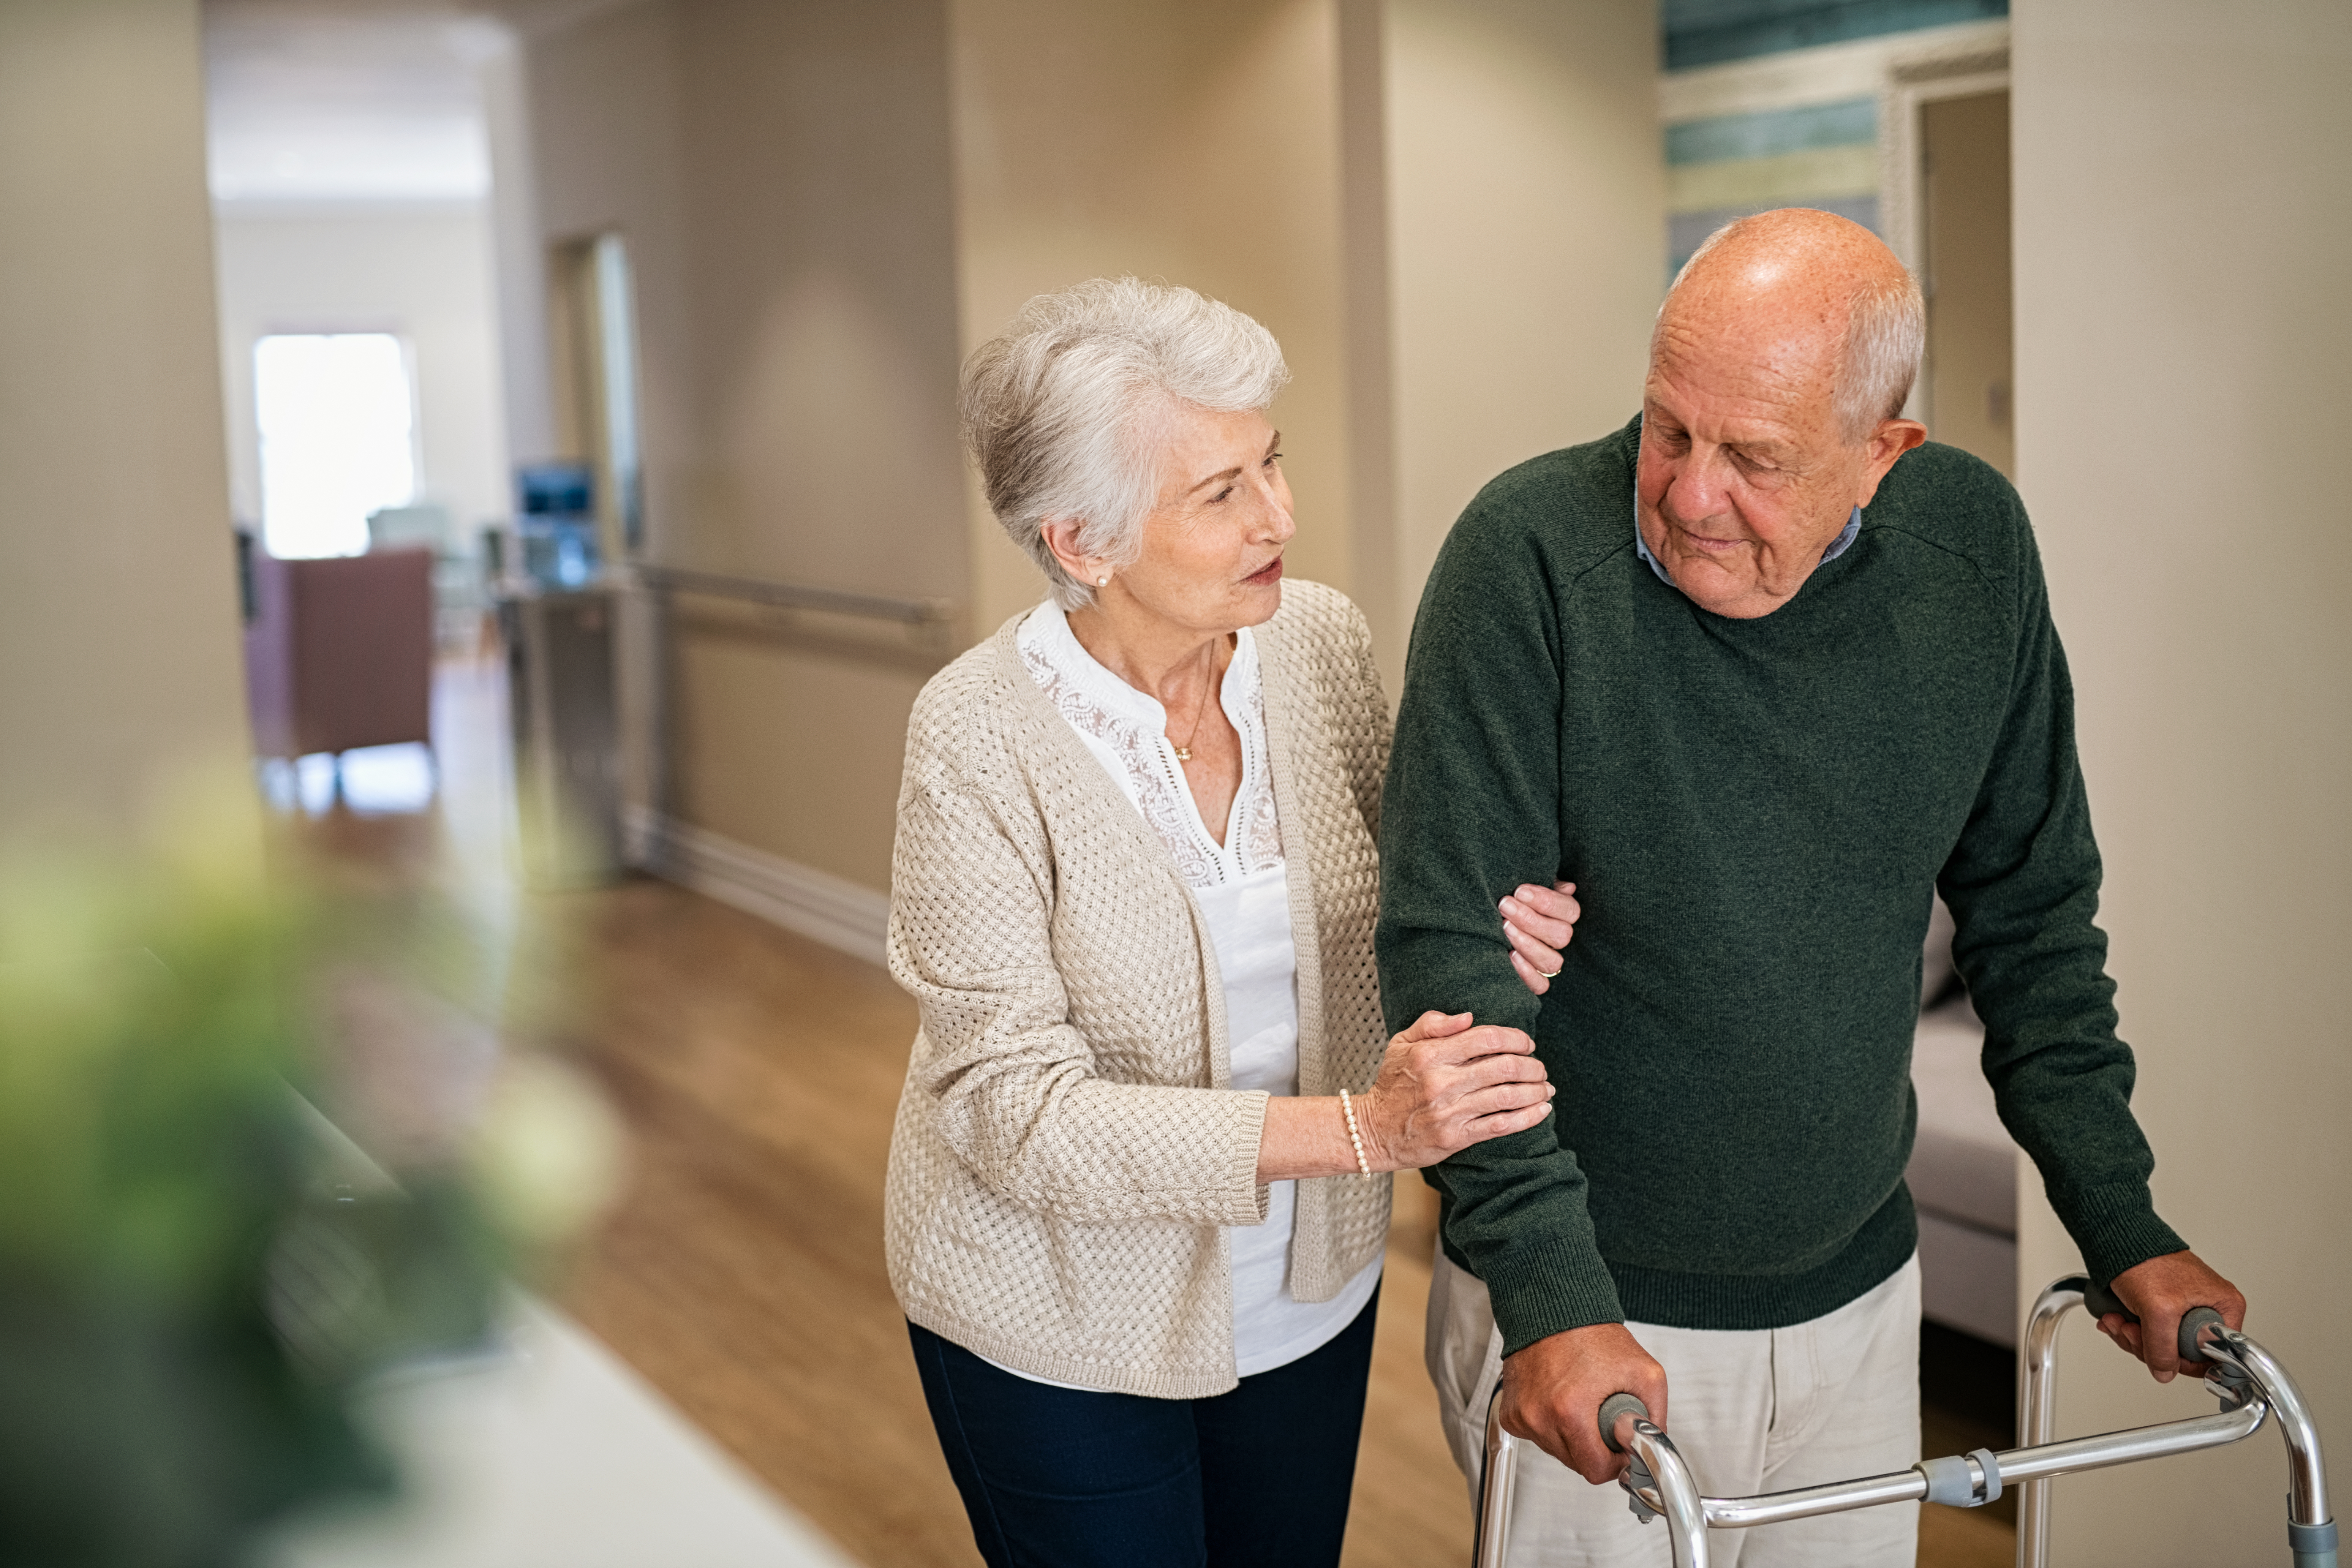 Walking frames, Rollators and Knee walkers: What are they and what’s the difference?